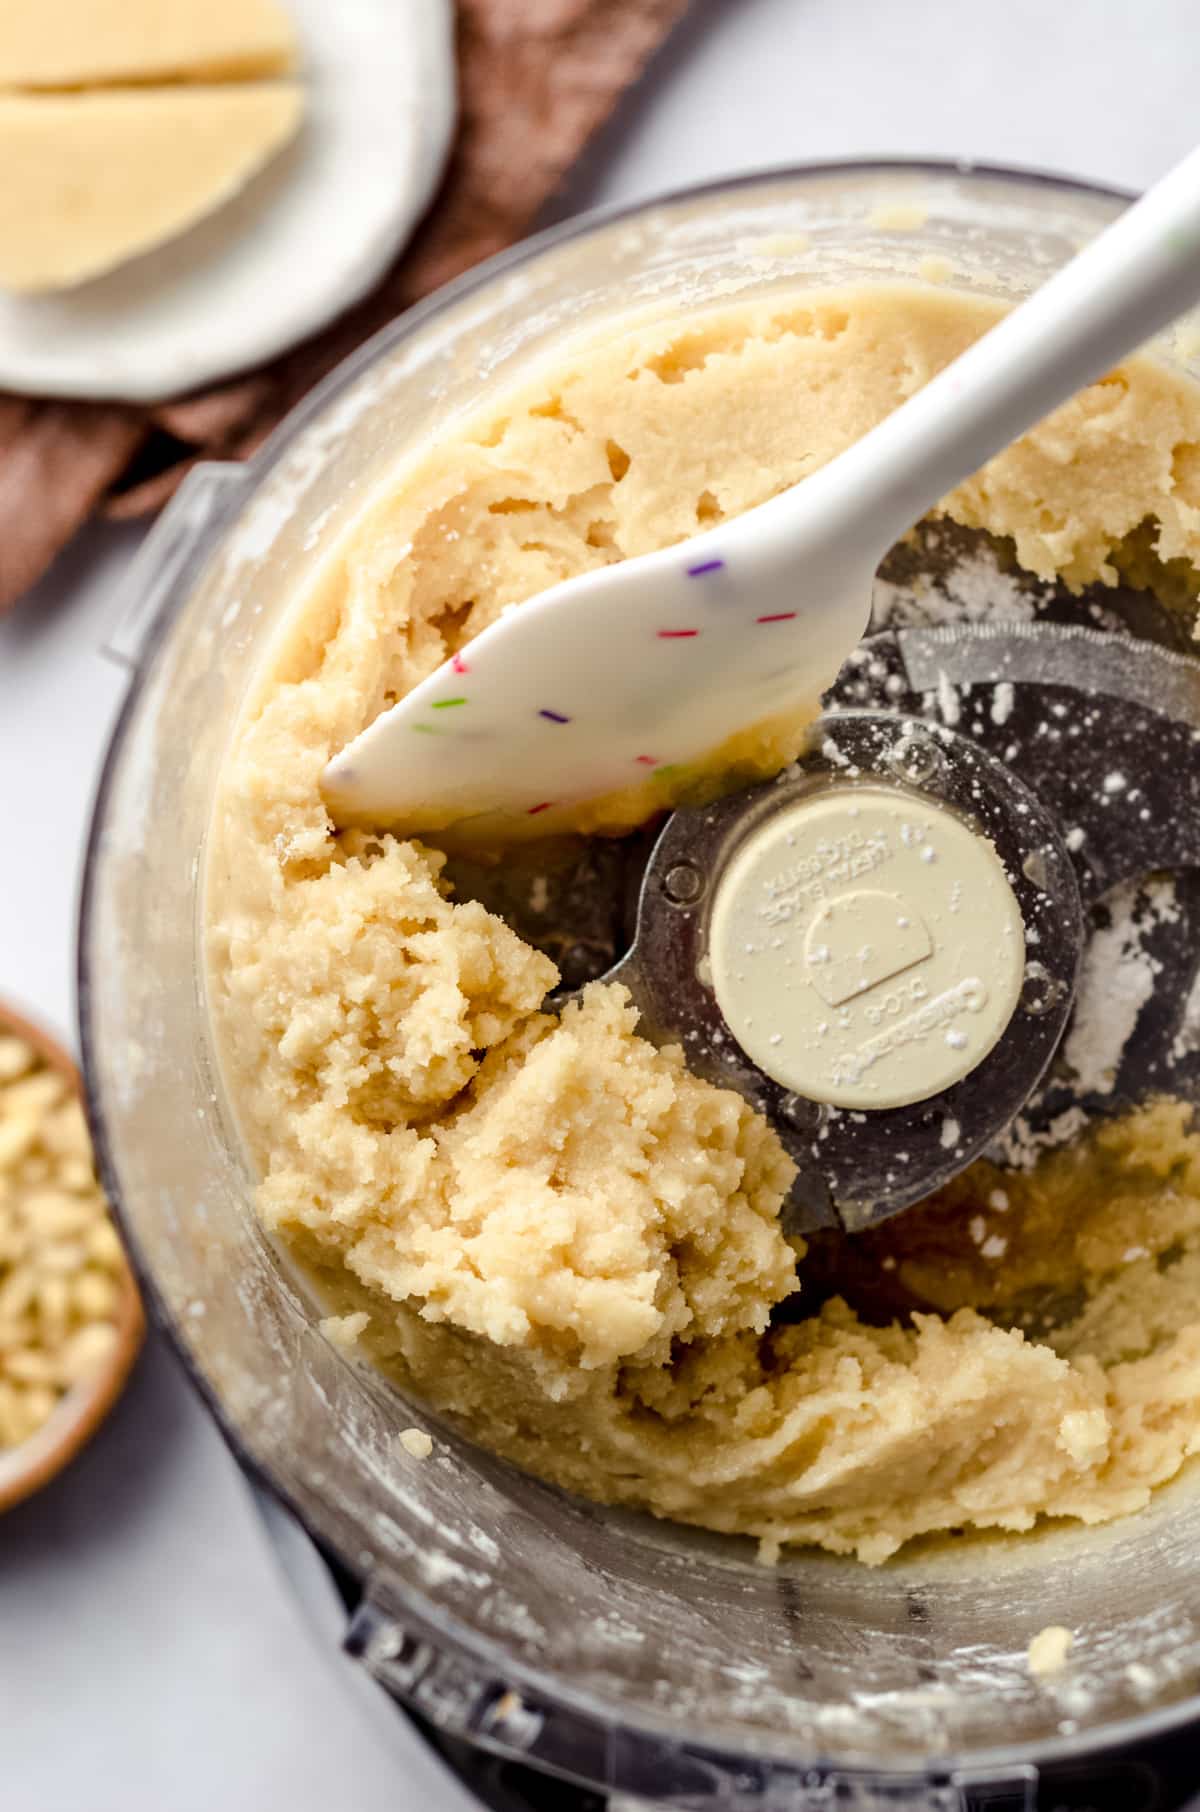 Scraping down the sides of food processor with cookie dough.